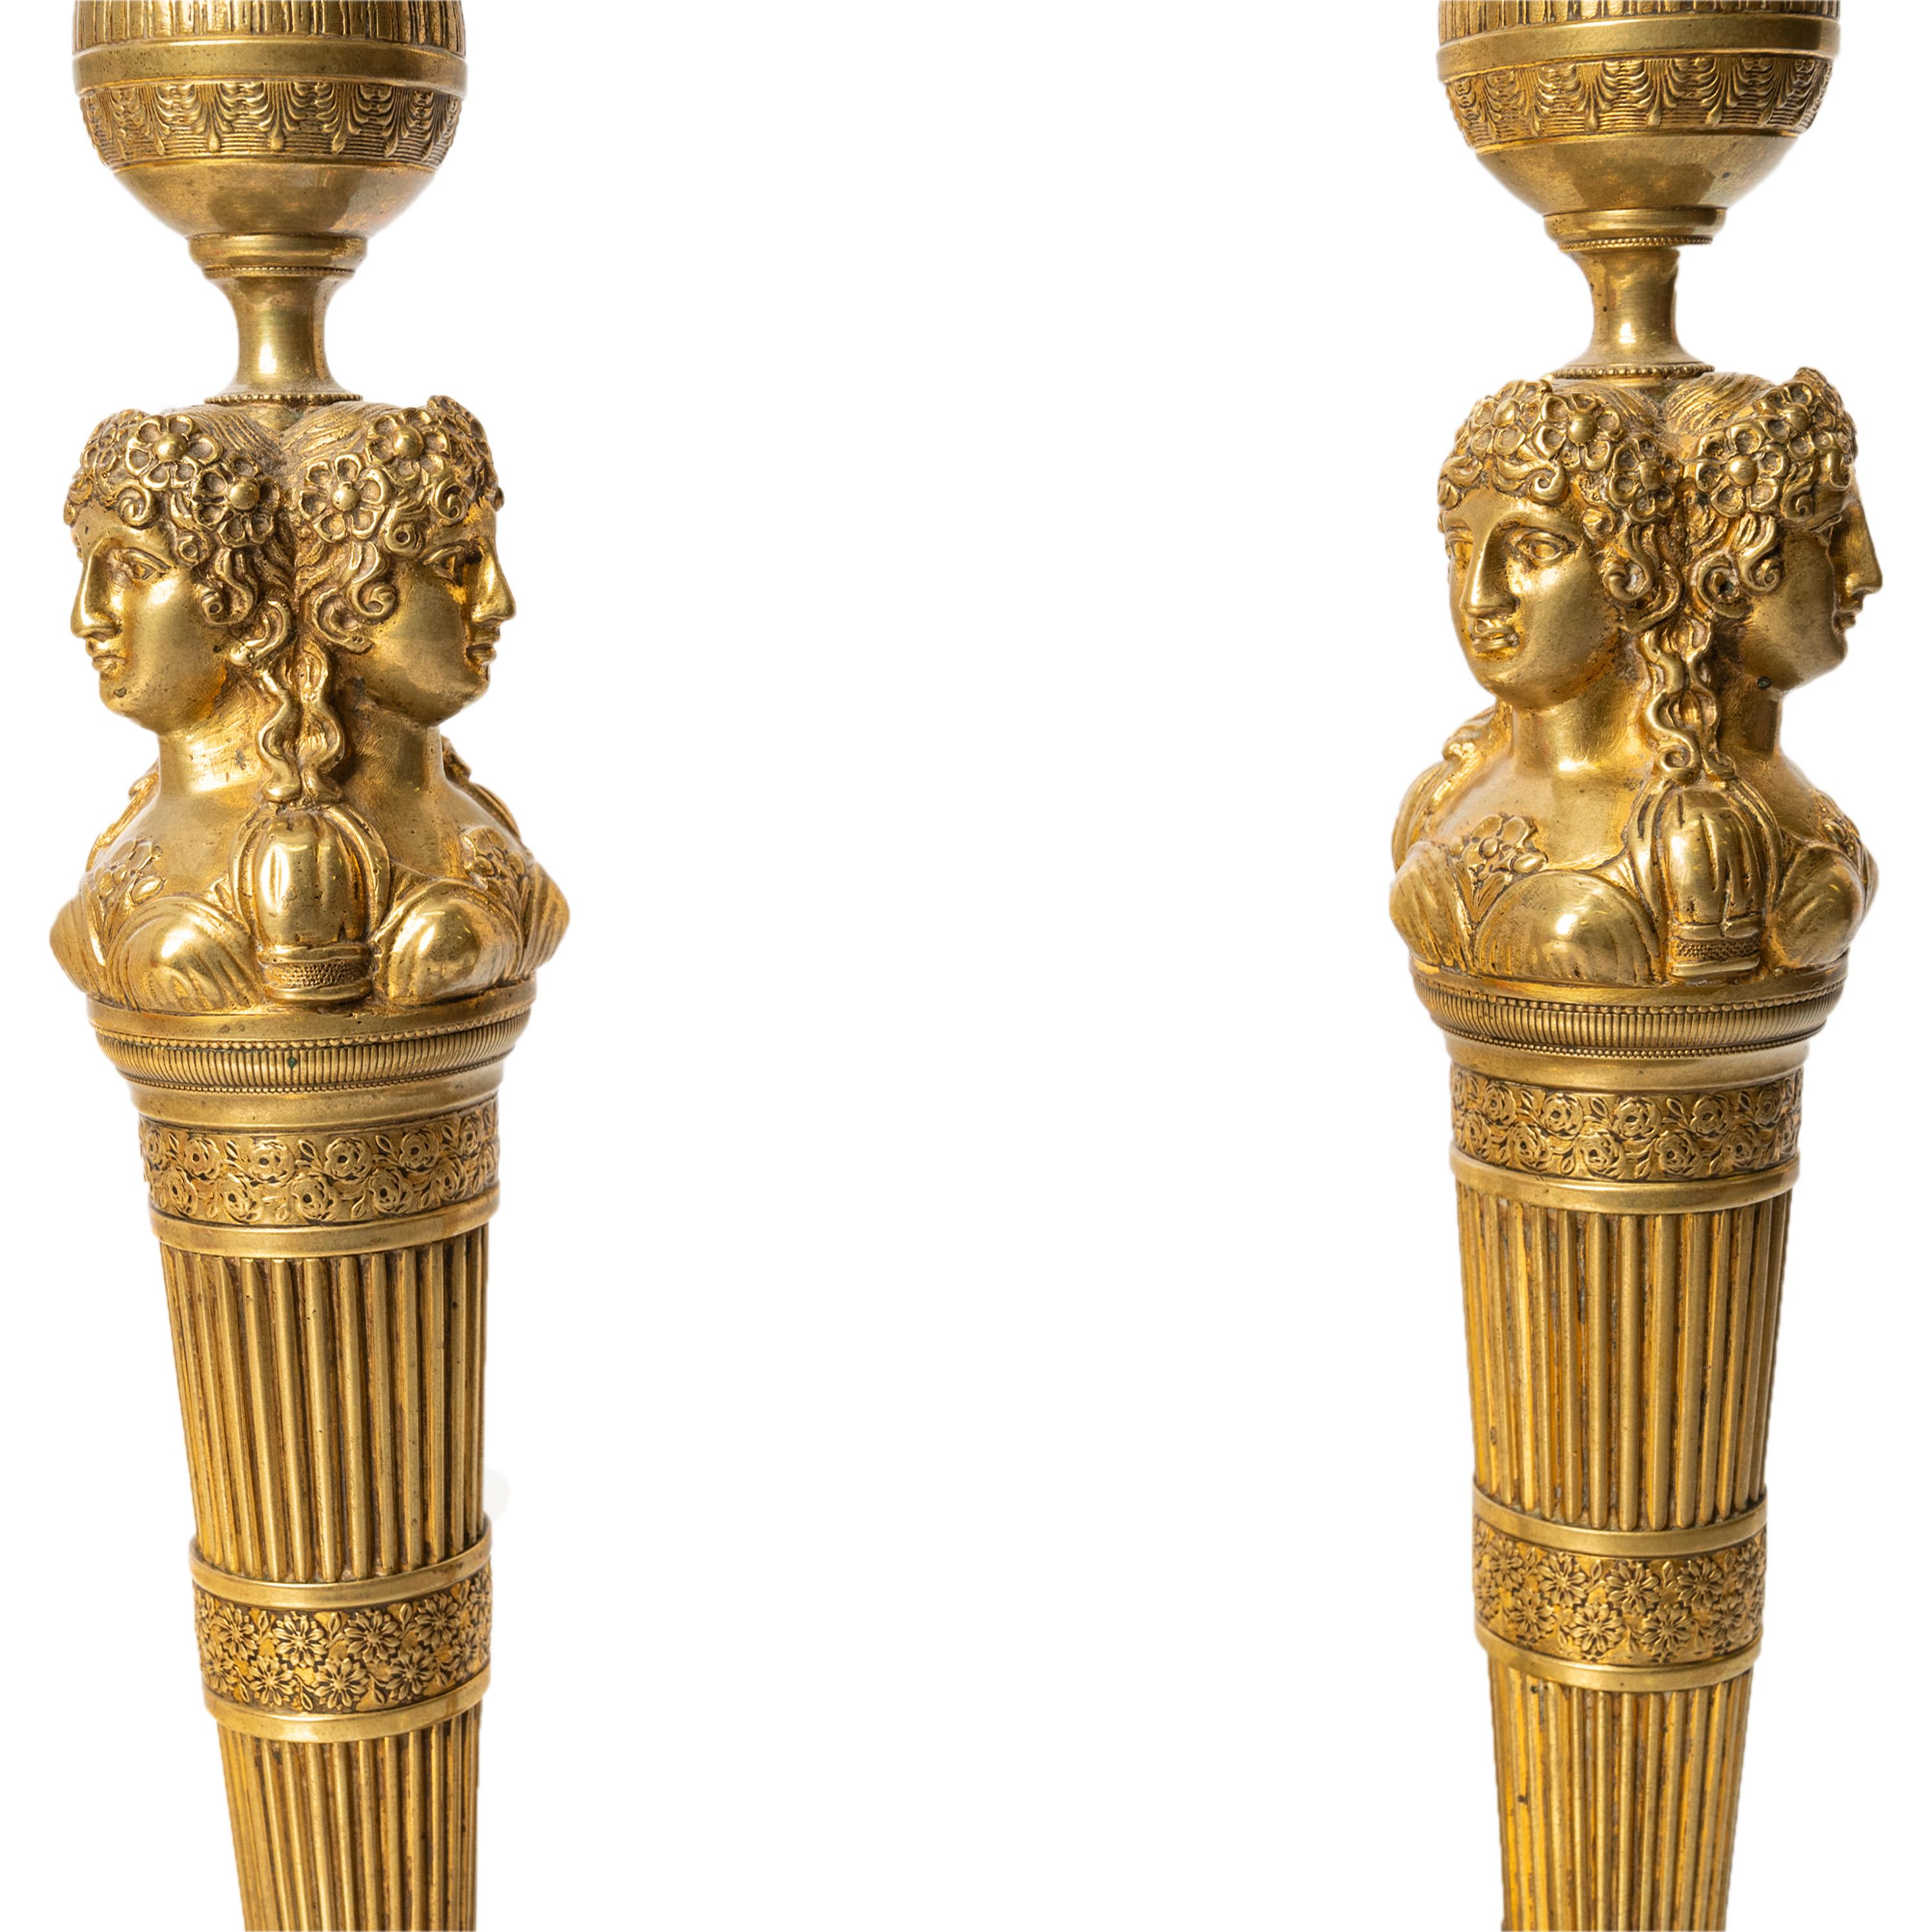 Pair Antique Early 19thC French Empire Neoclassical Gilt Bronze Candlesticks For Sale 10